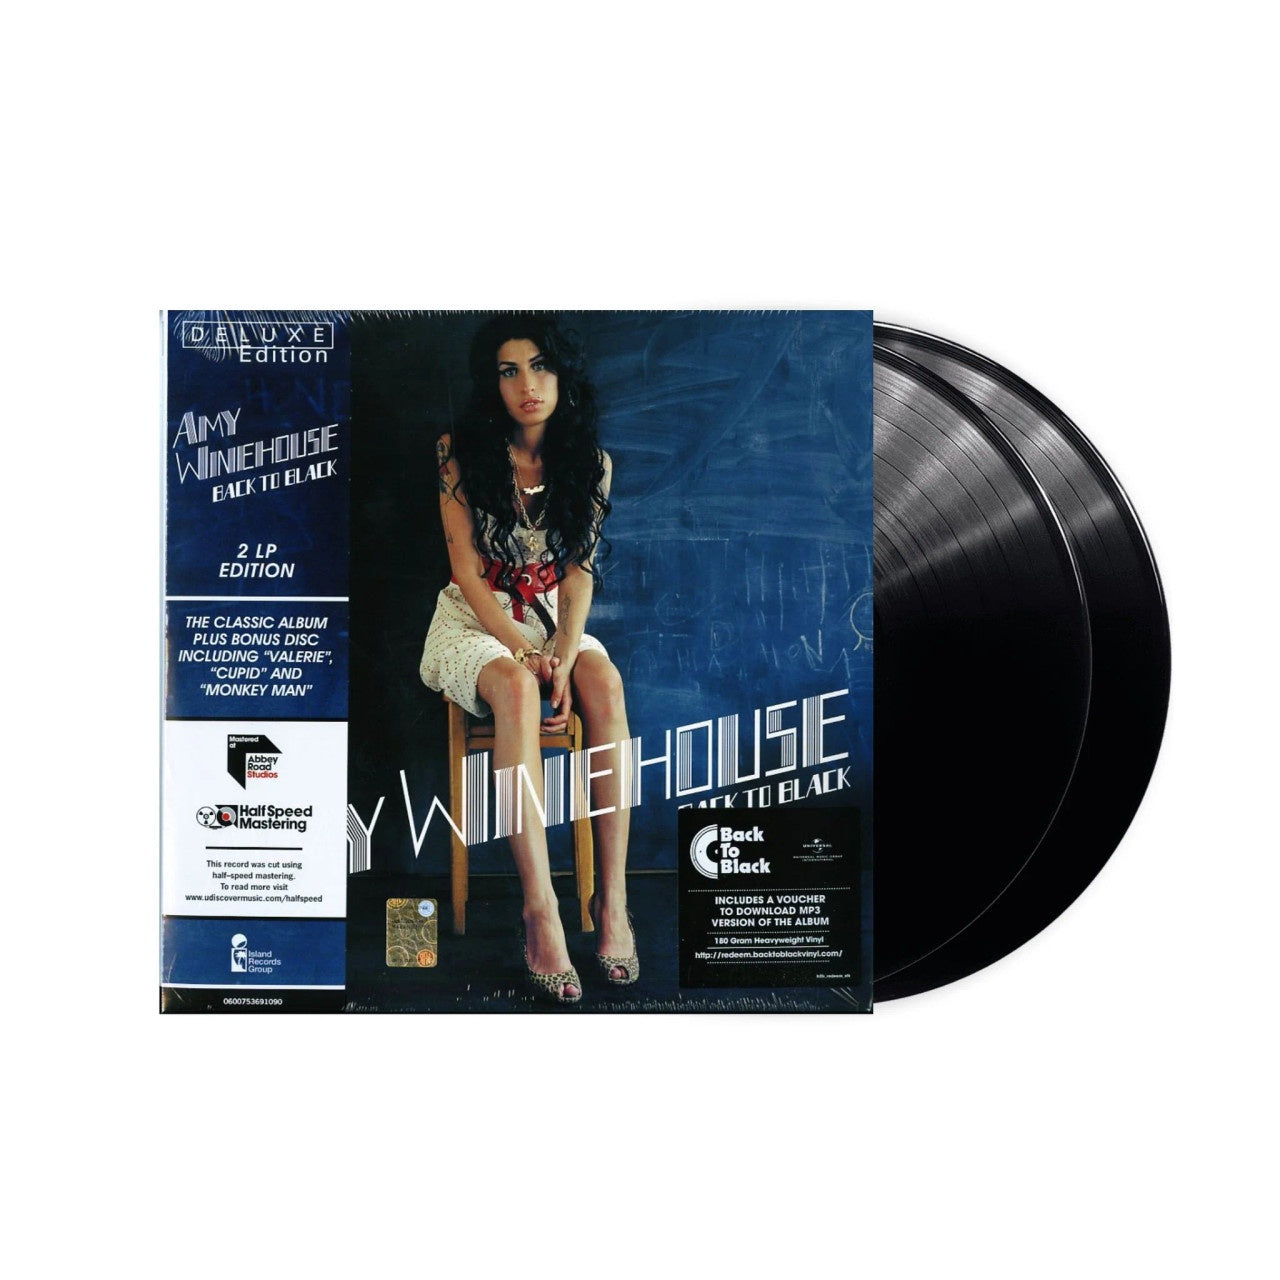 NEW - Amy Winehouse, Black to Black (1/2 Speed Mastering) 2LP (IMPORT)